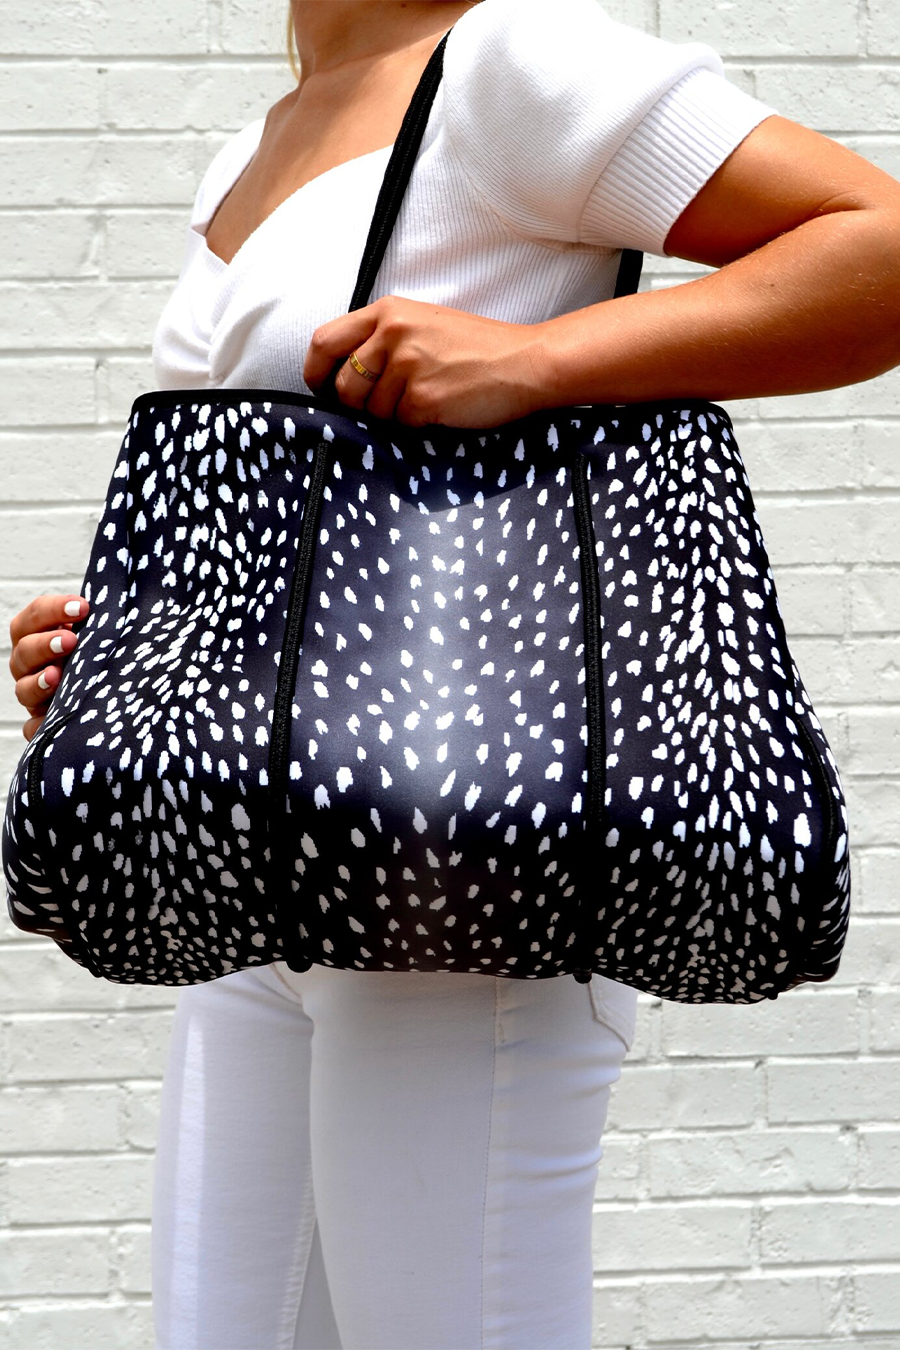 Neoprene Tote | Black Fawn - Main Image Number 1 of 1